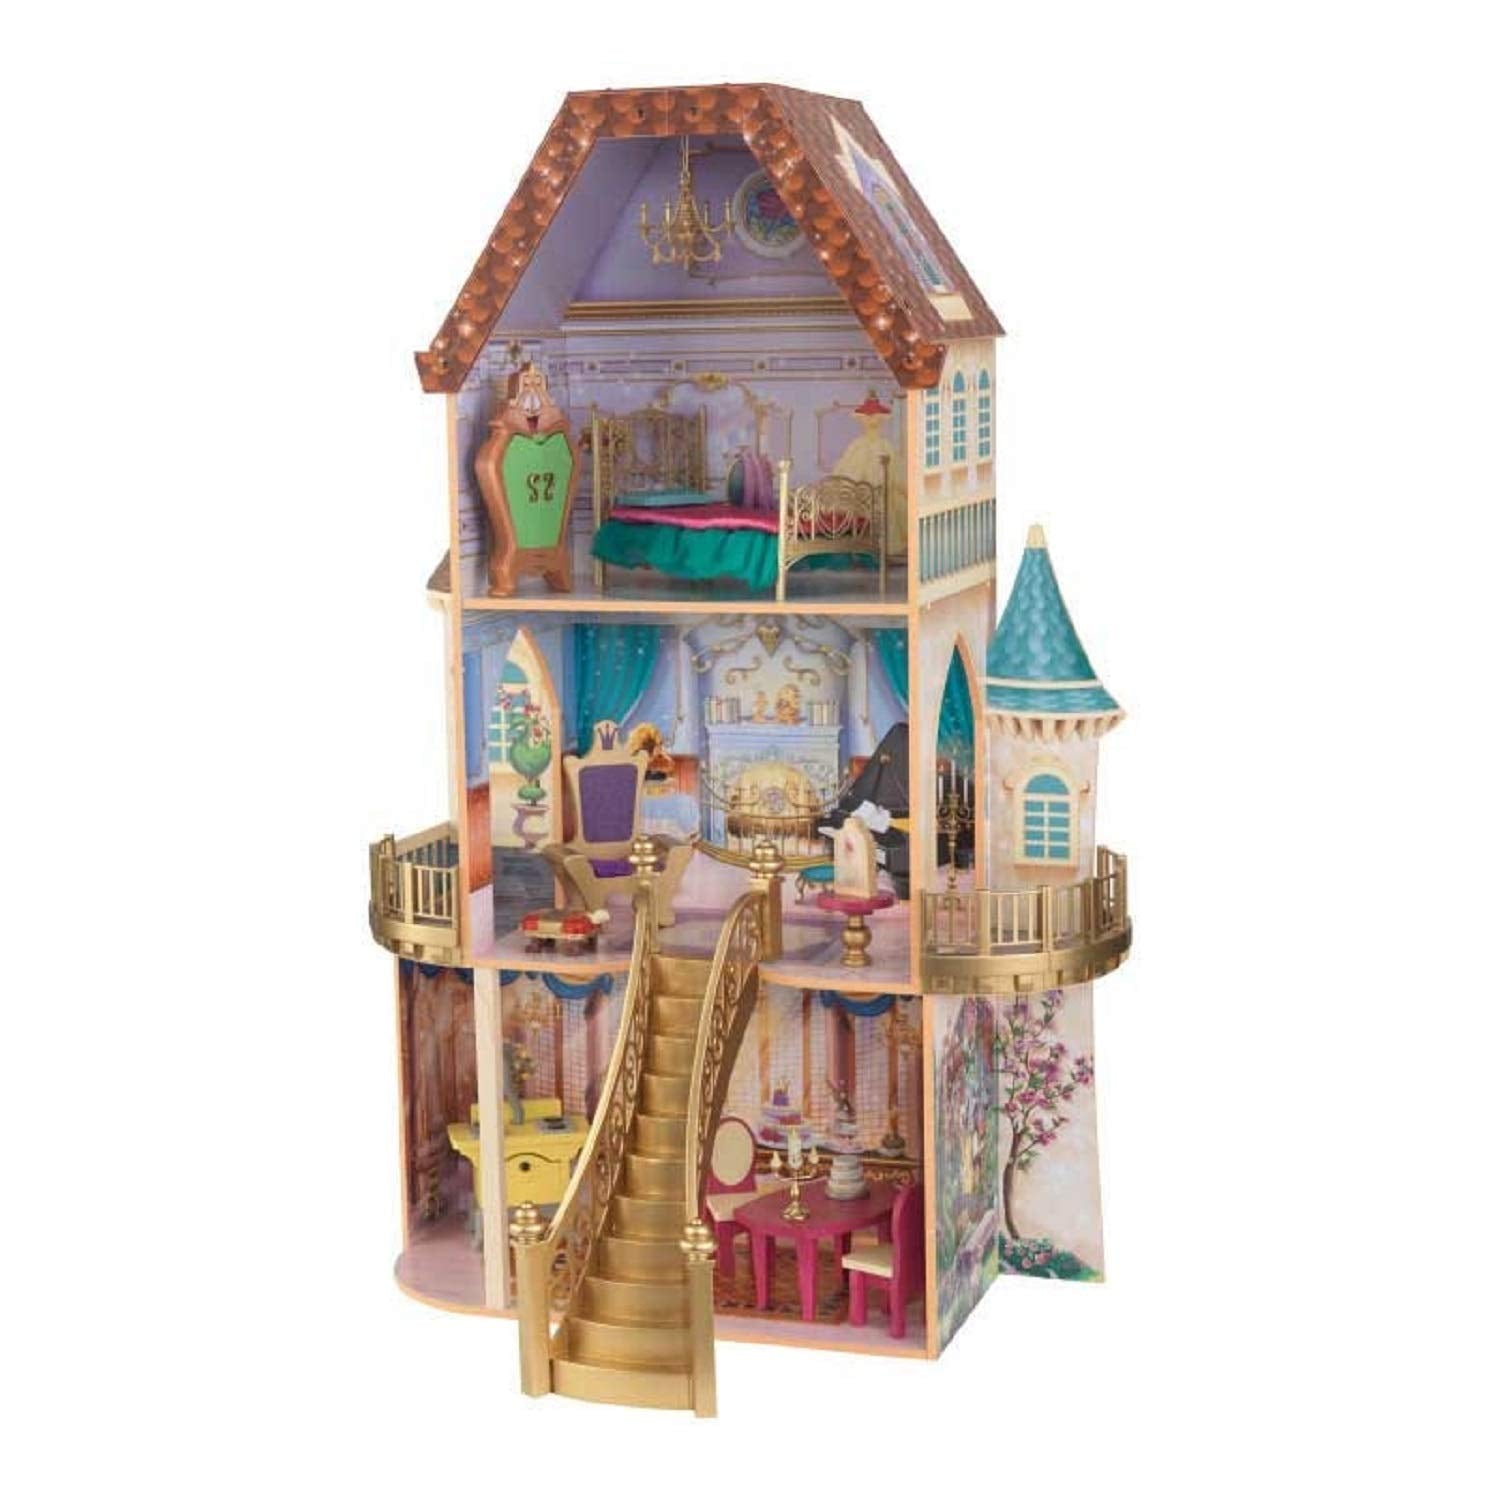 KidKraft Disney Princess Belle Enchanted Wooden Dollhouse, Almost Four Feet Tall, with Balconies, Staircase and 13 Accessories, Gift for Ages 3+